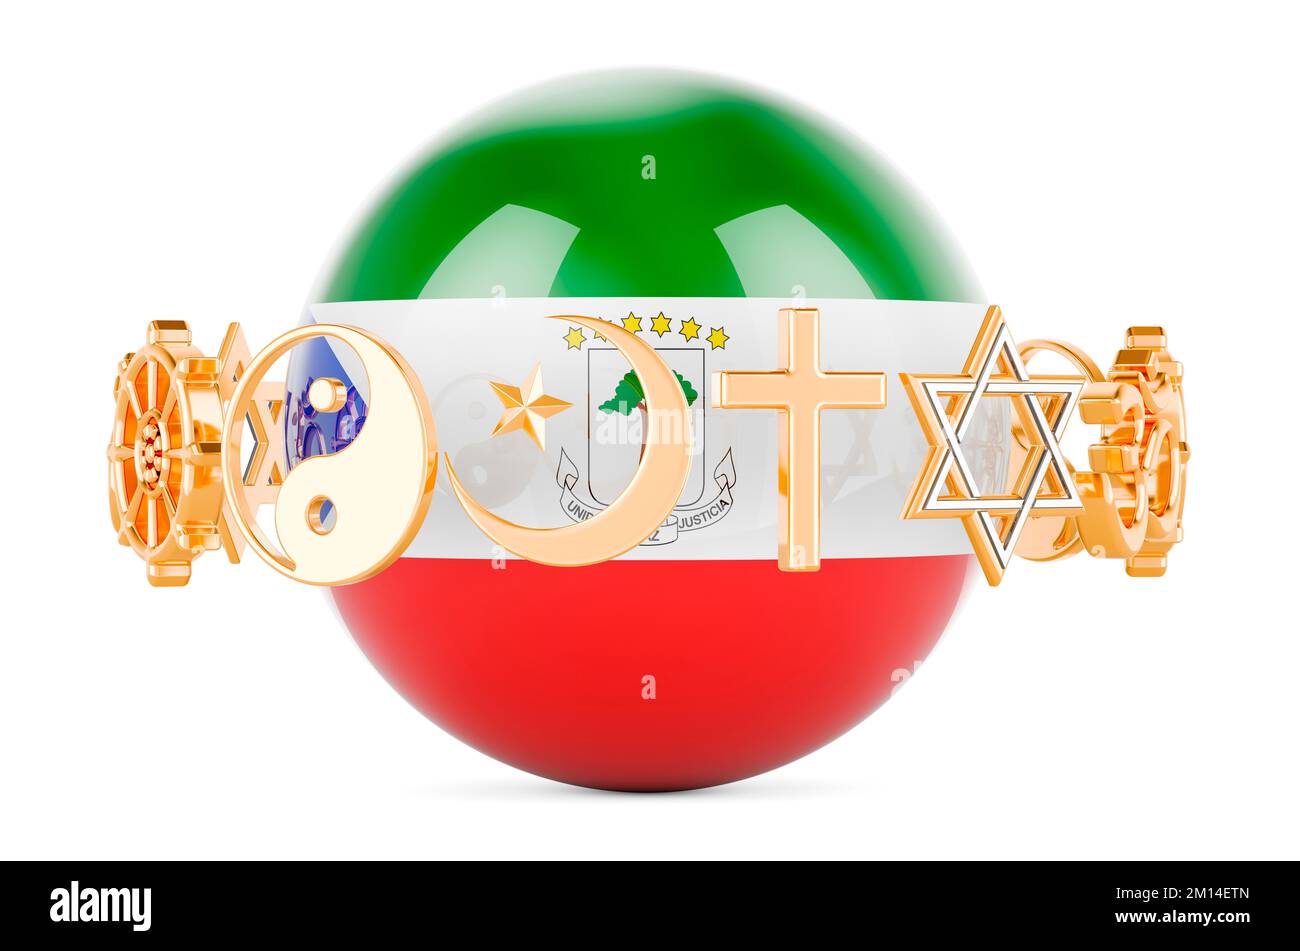 Equatoguinean Guinea flag painted on sphere with religions symbols around, 3D rendering isolated on white background Stock Photo